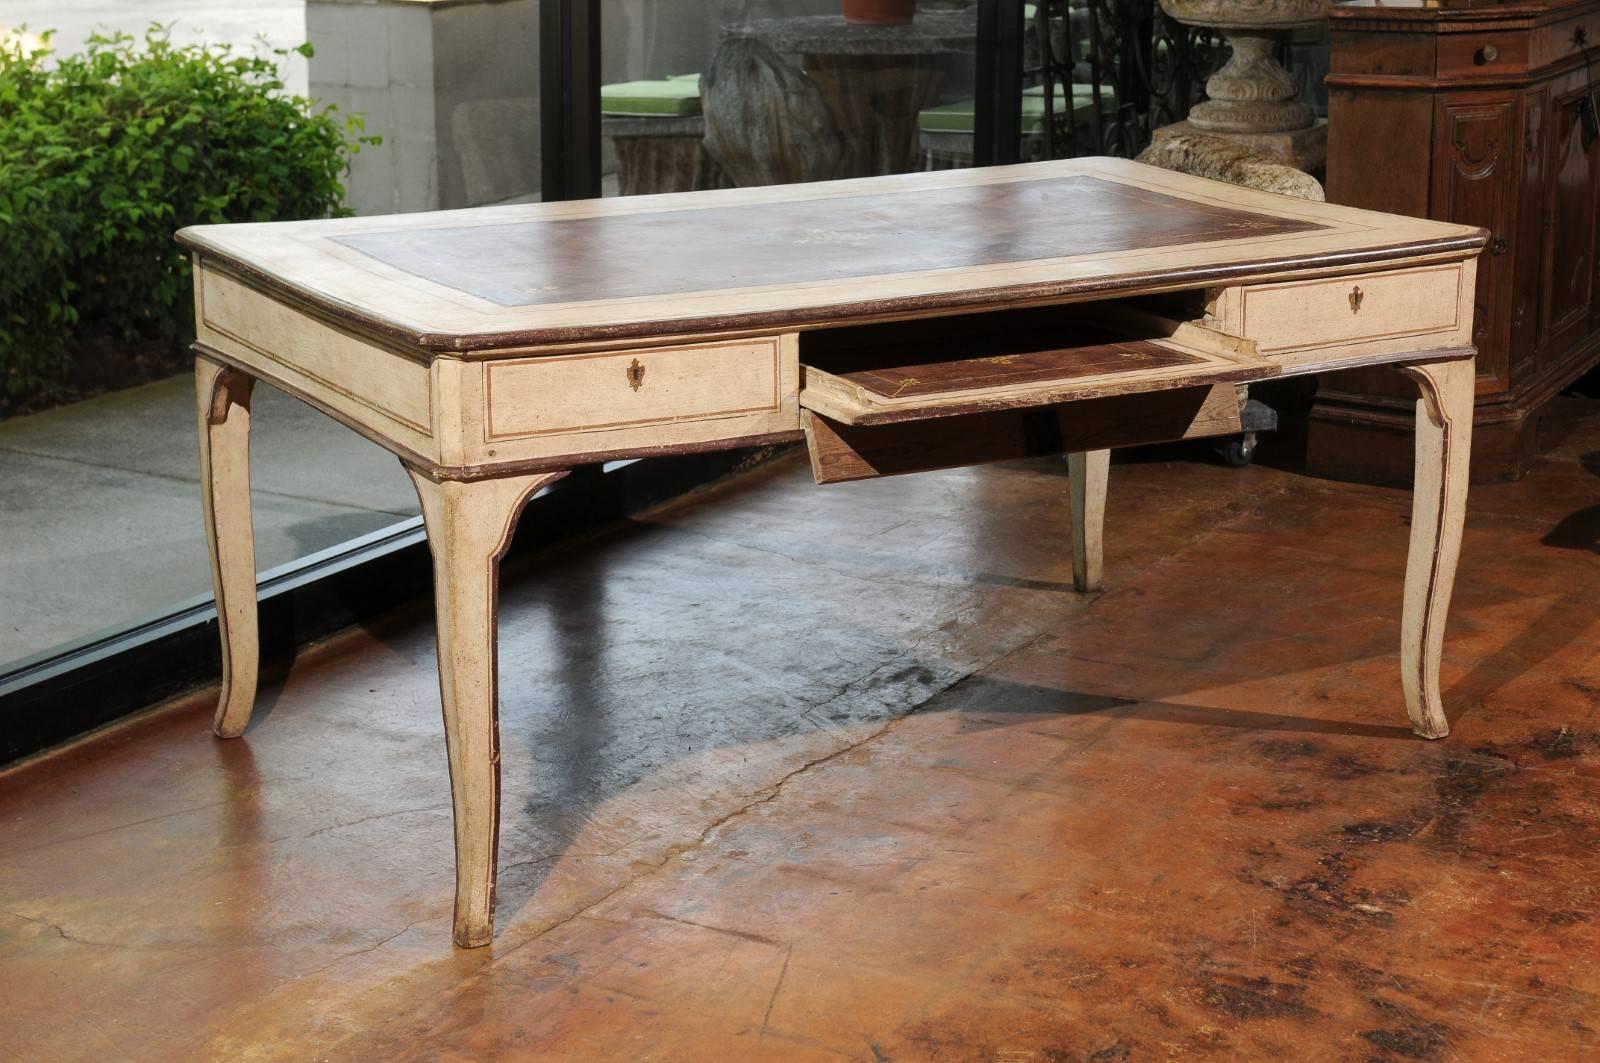 An Italian painted wood desk from the late 18th century with hidden drawers, faux leather top and cabriole legs. This Italian writing table features an exquisite rectangular top with rounded edges, adorned in its center with a brown faux leather